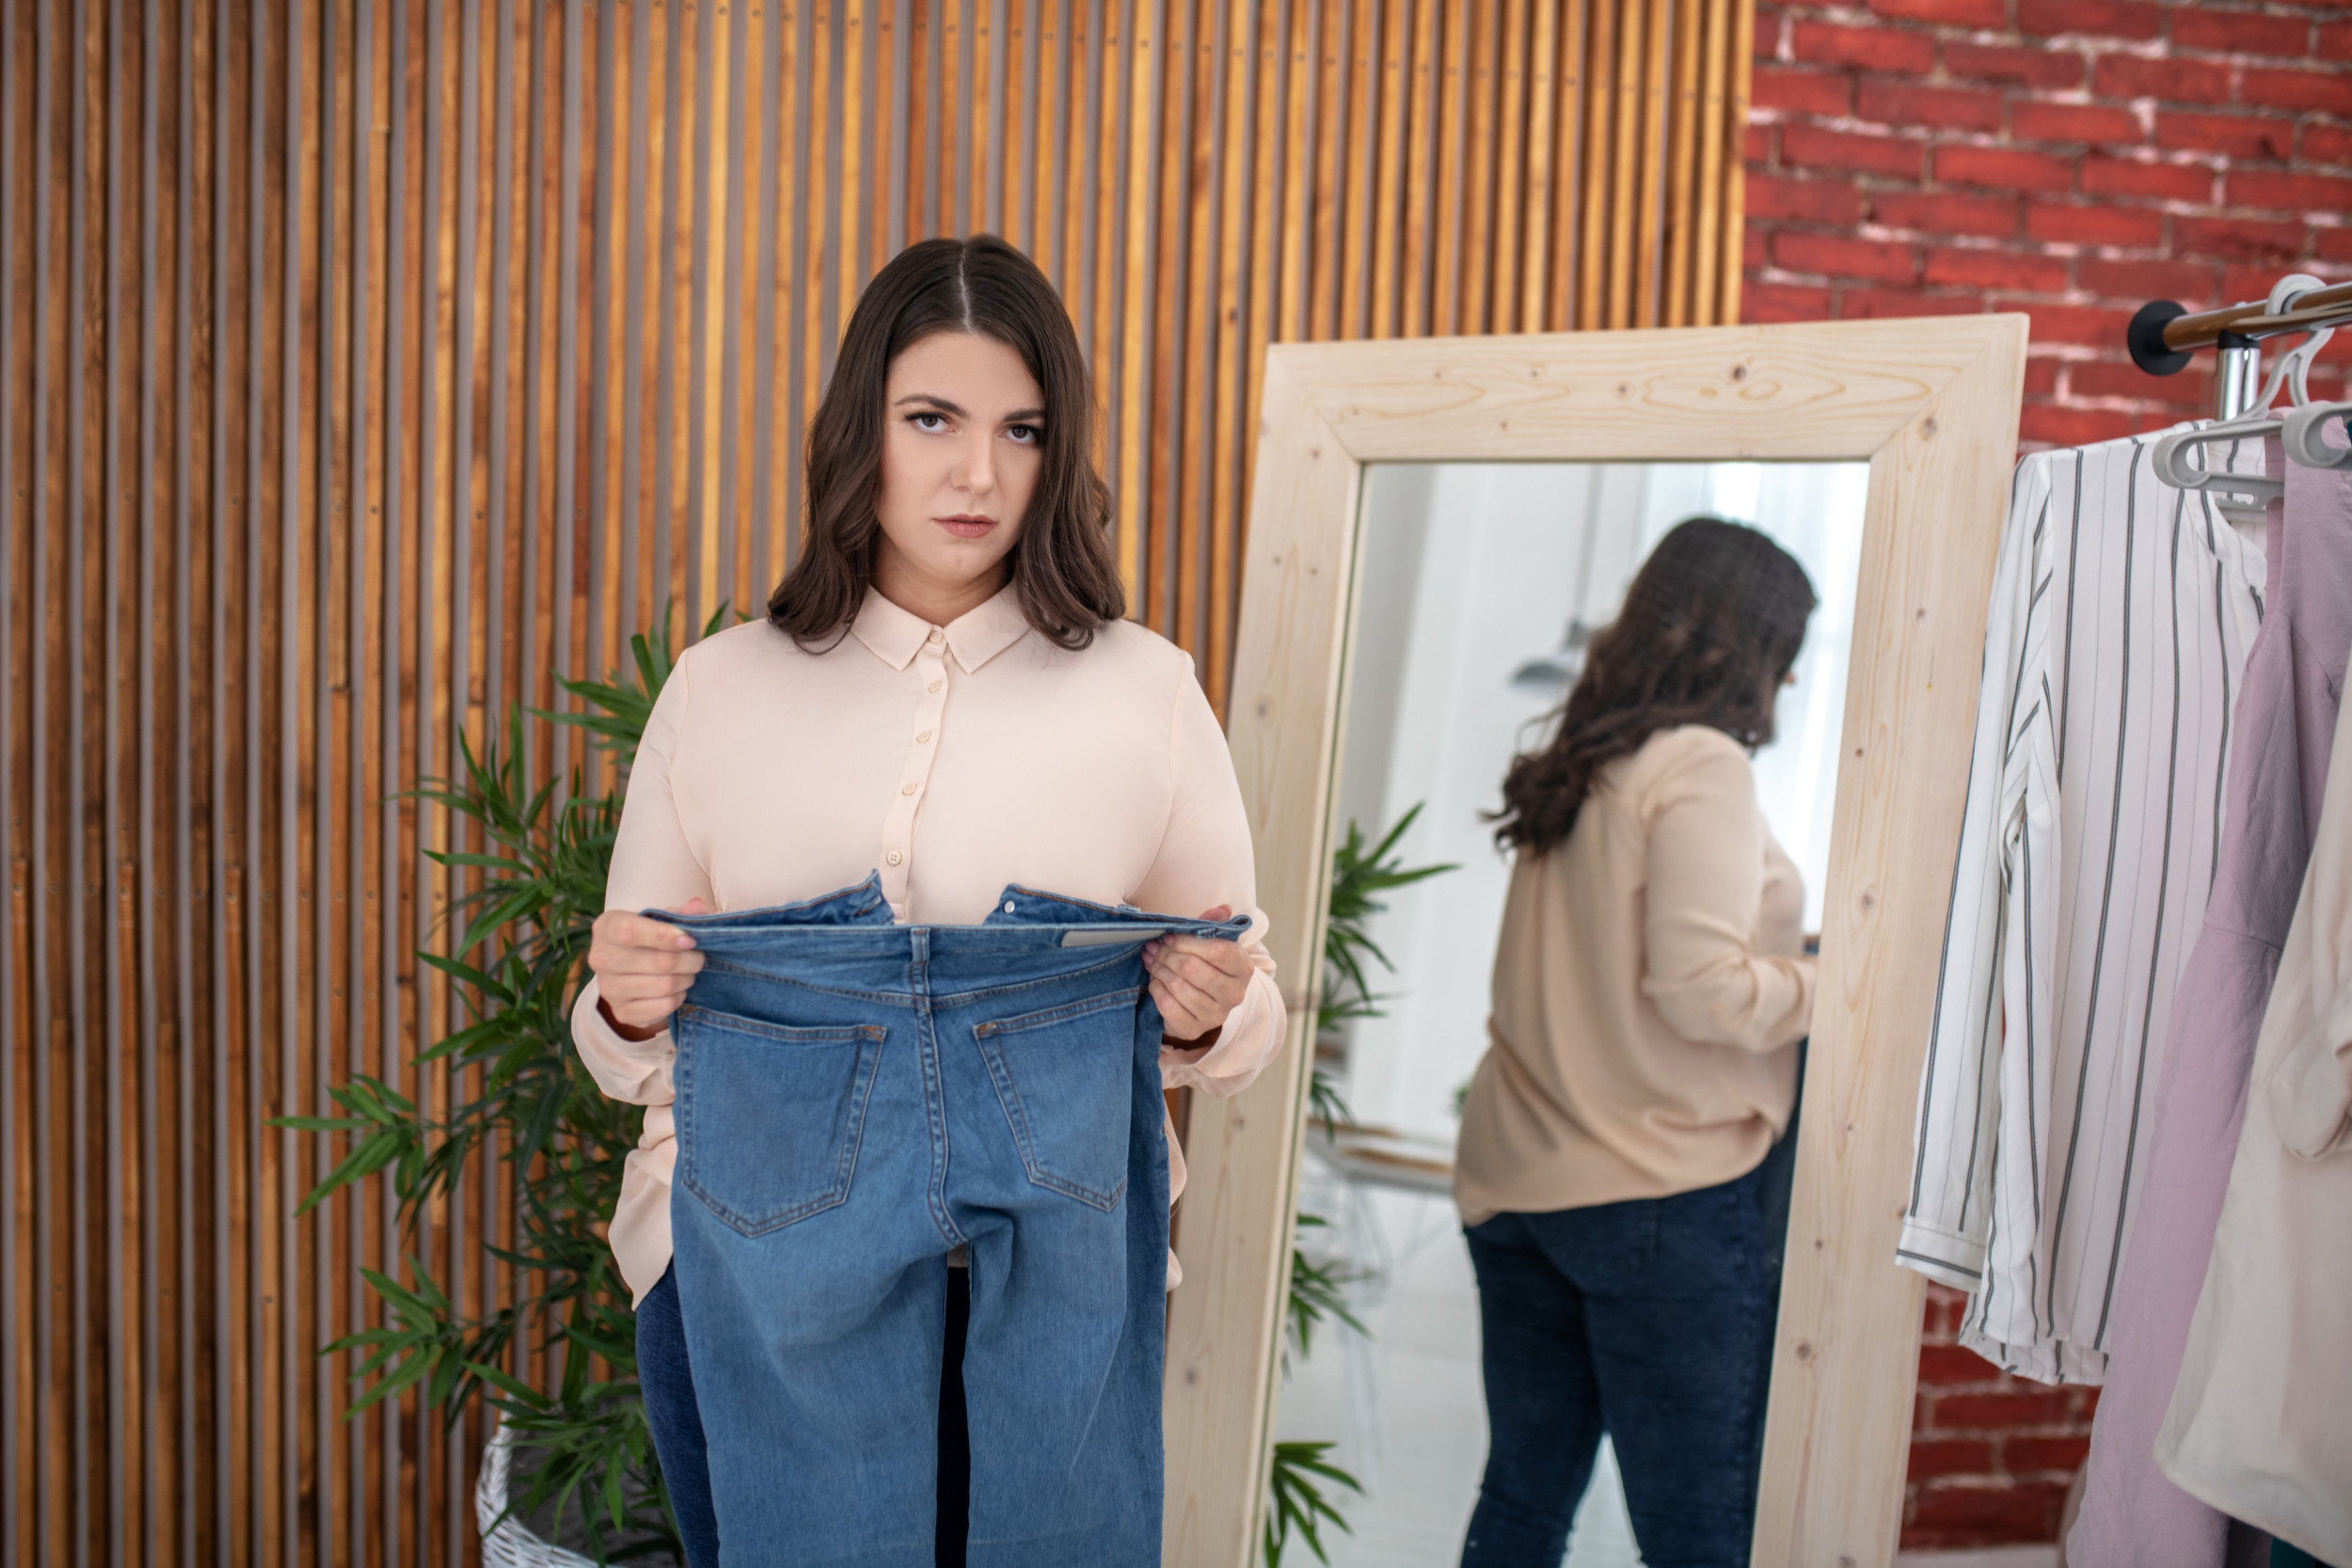 Curvy is the New Full Figure: Body Positive Millennials Driving